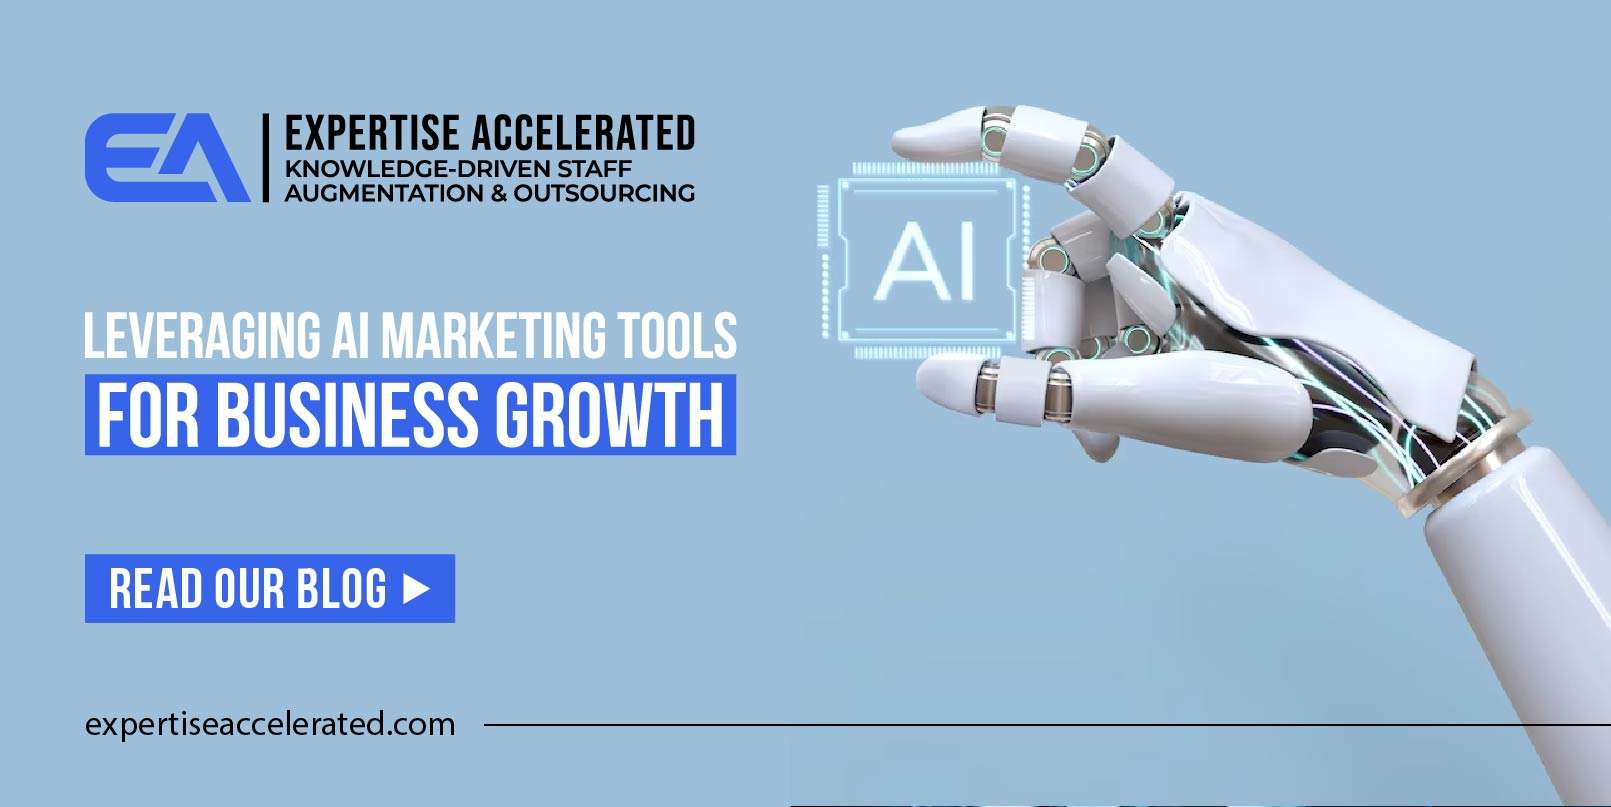 Business Growth by Leveraging AI Marketing Tools